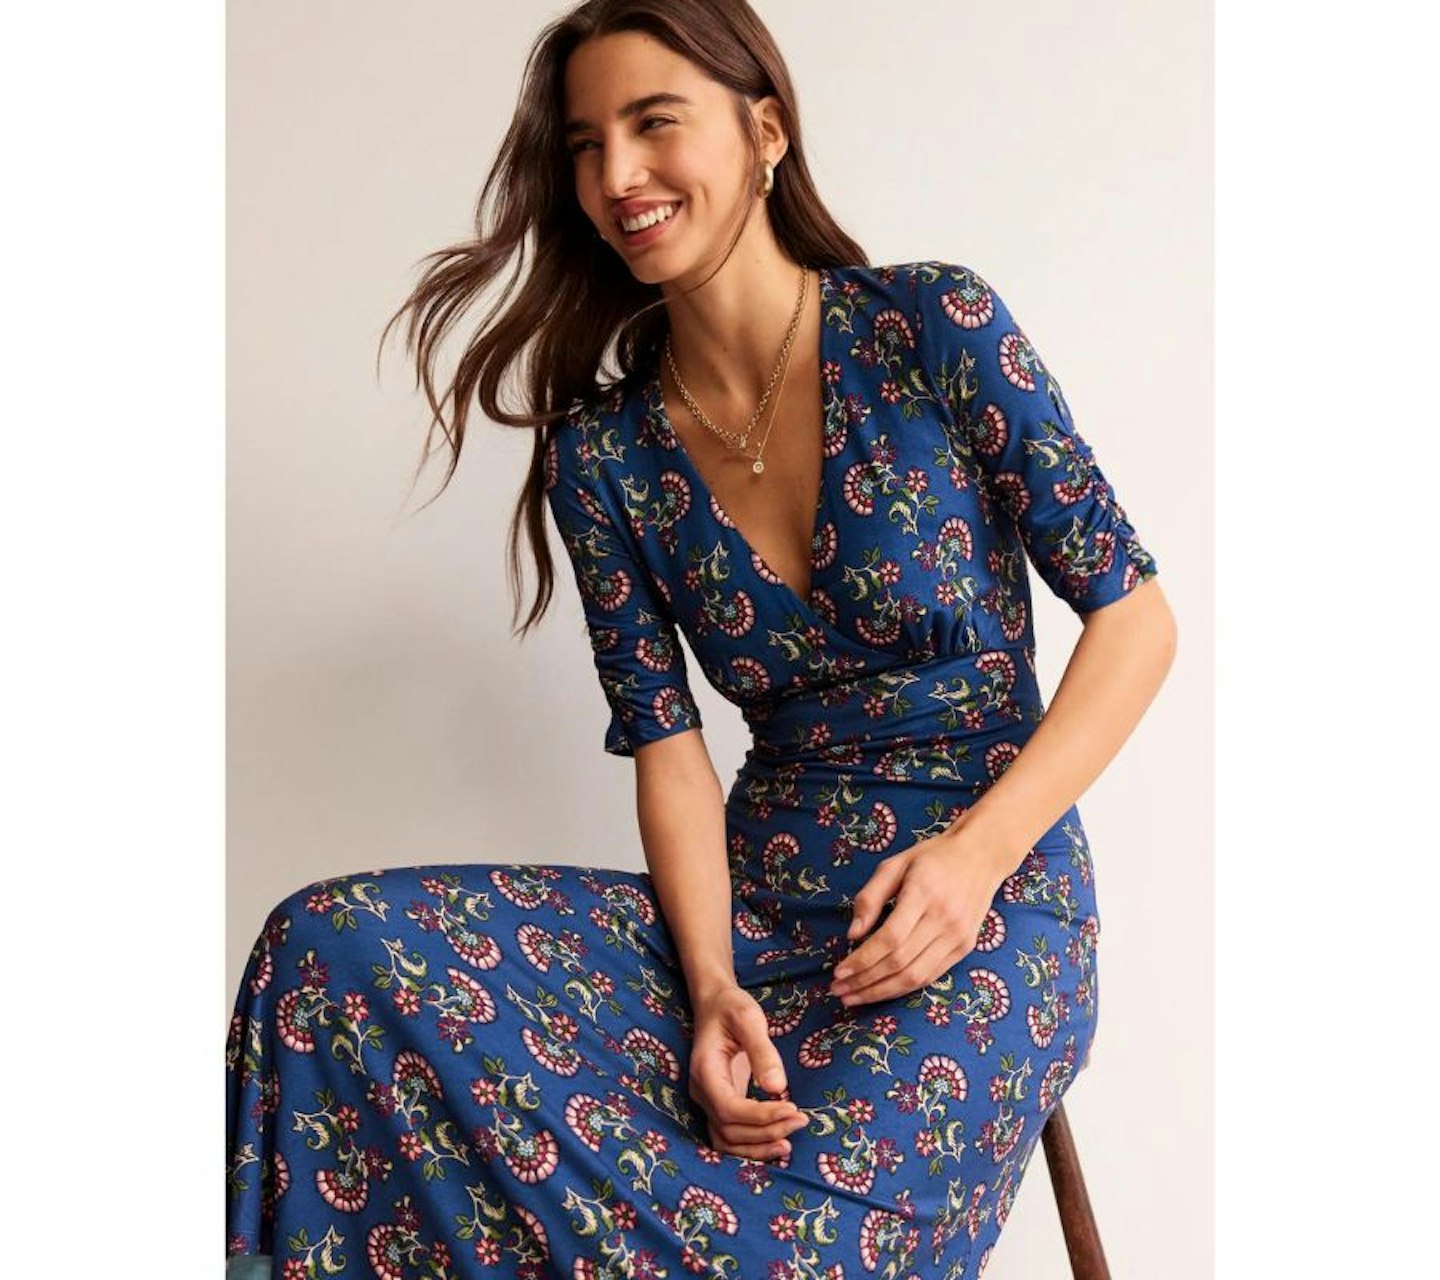 Boden - ladies' dresses for over 50s